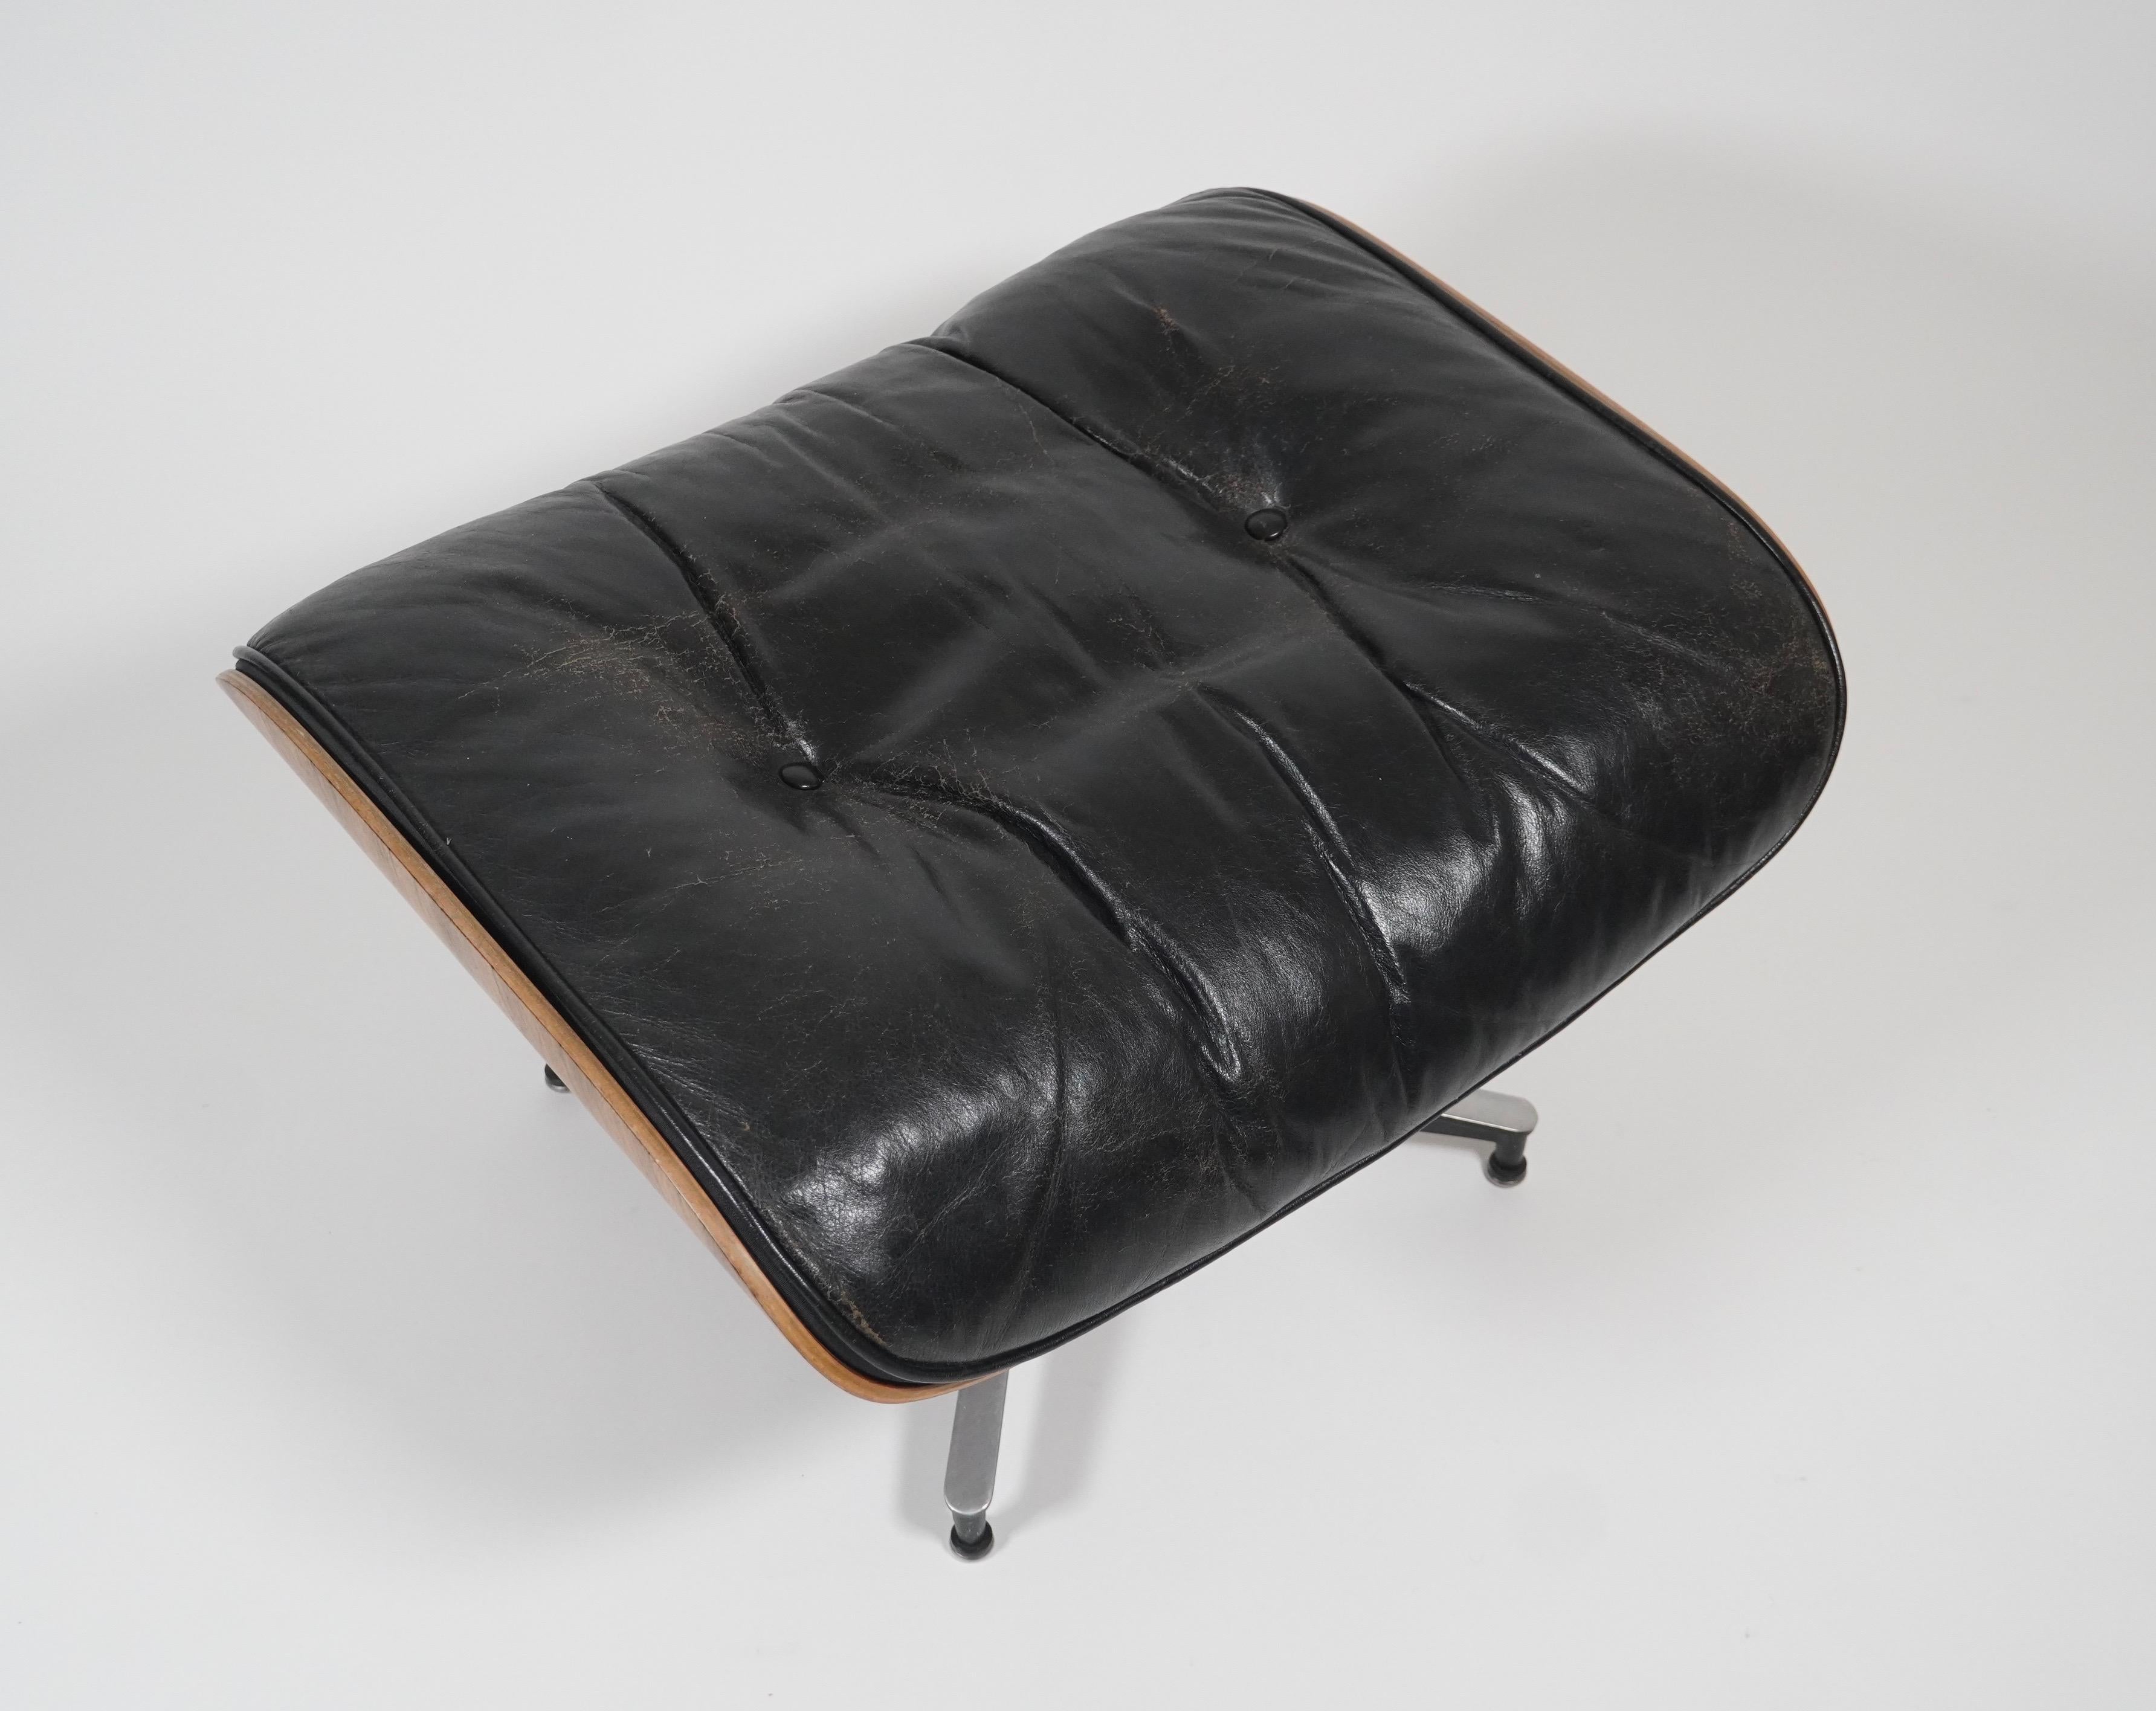 The iconic early 1960s rosewood / black leather 671 ottoman designed by Ray and Charles Eames and manufactured by Herman Miller. Great to use alone for occasional seating and as an accent or pair with the classic 670 leather lounge chair. Original